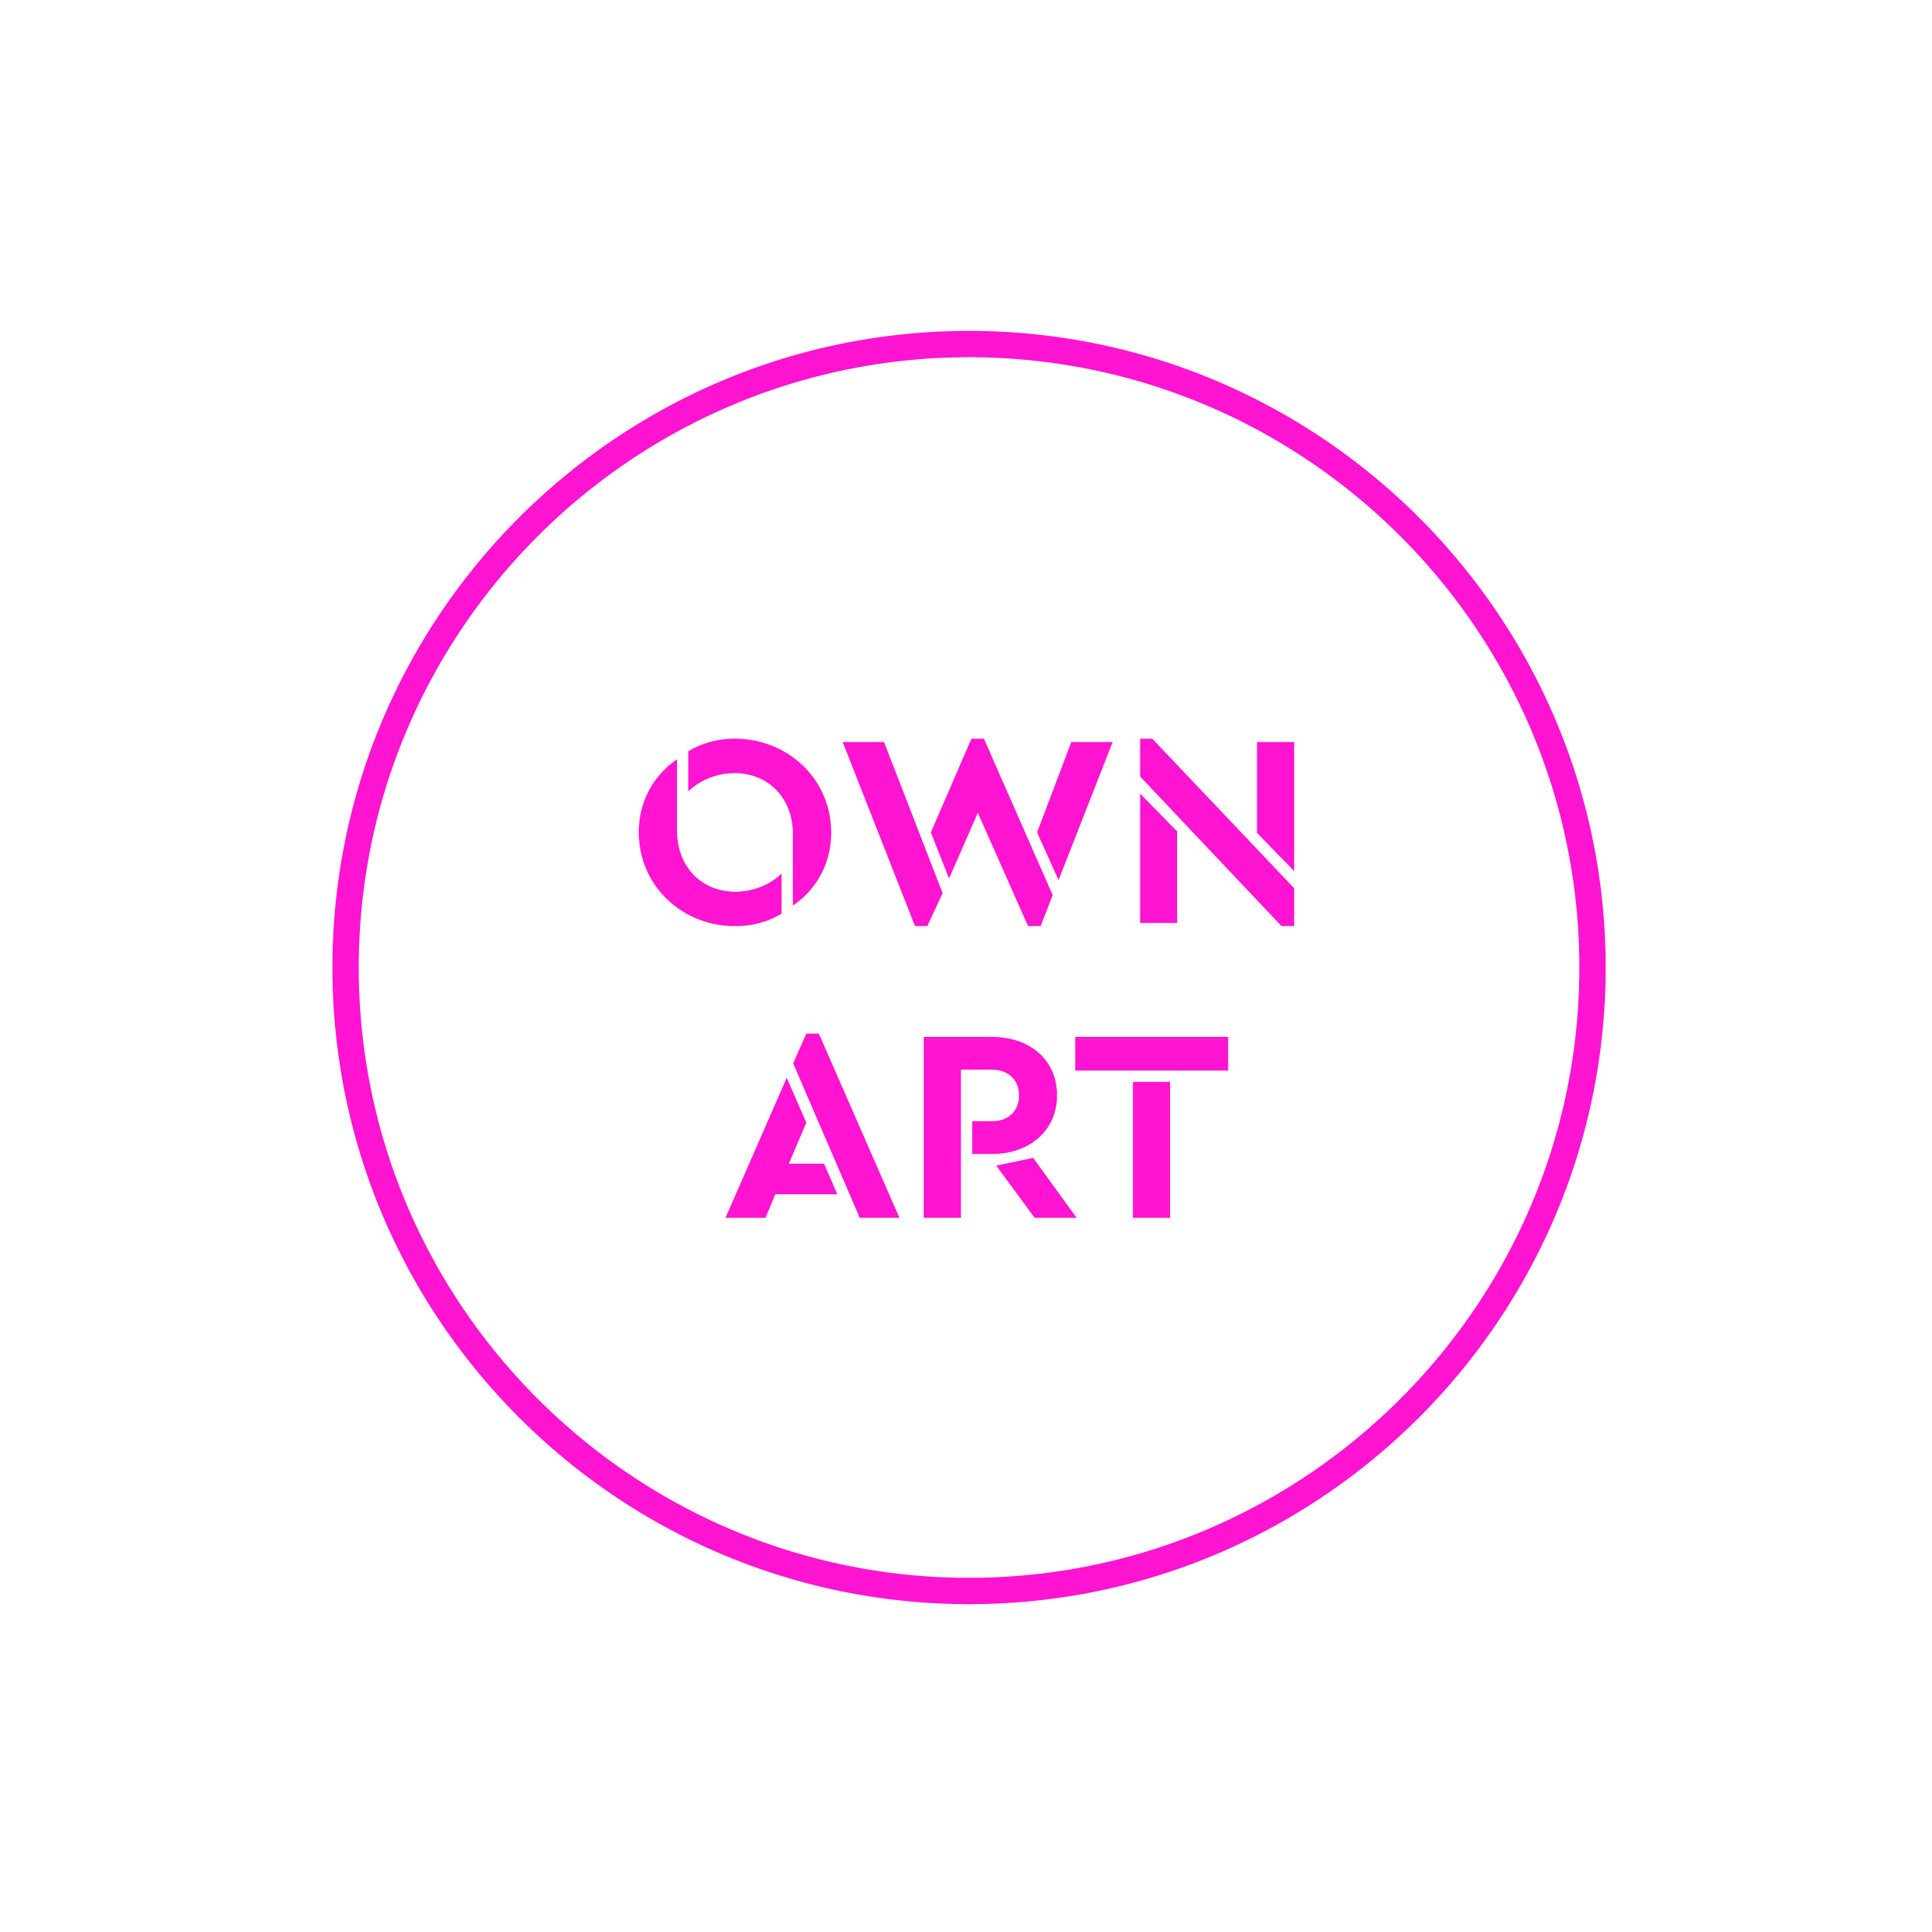 Own Art - Click here to view this entry